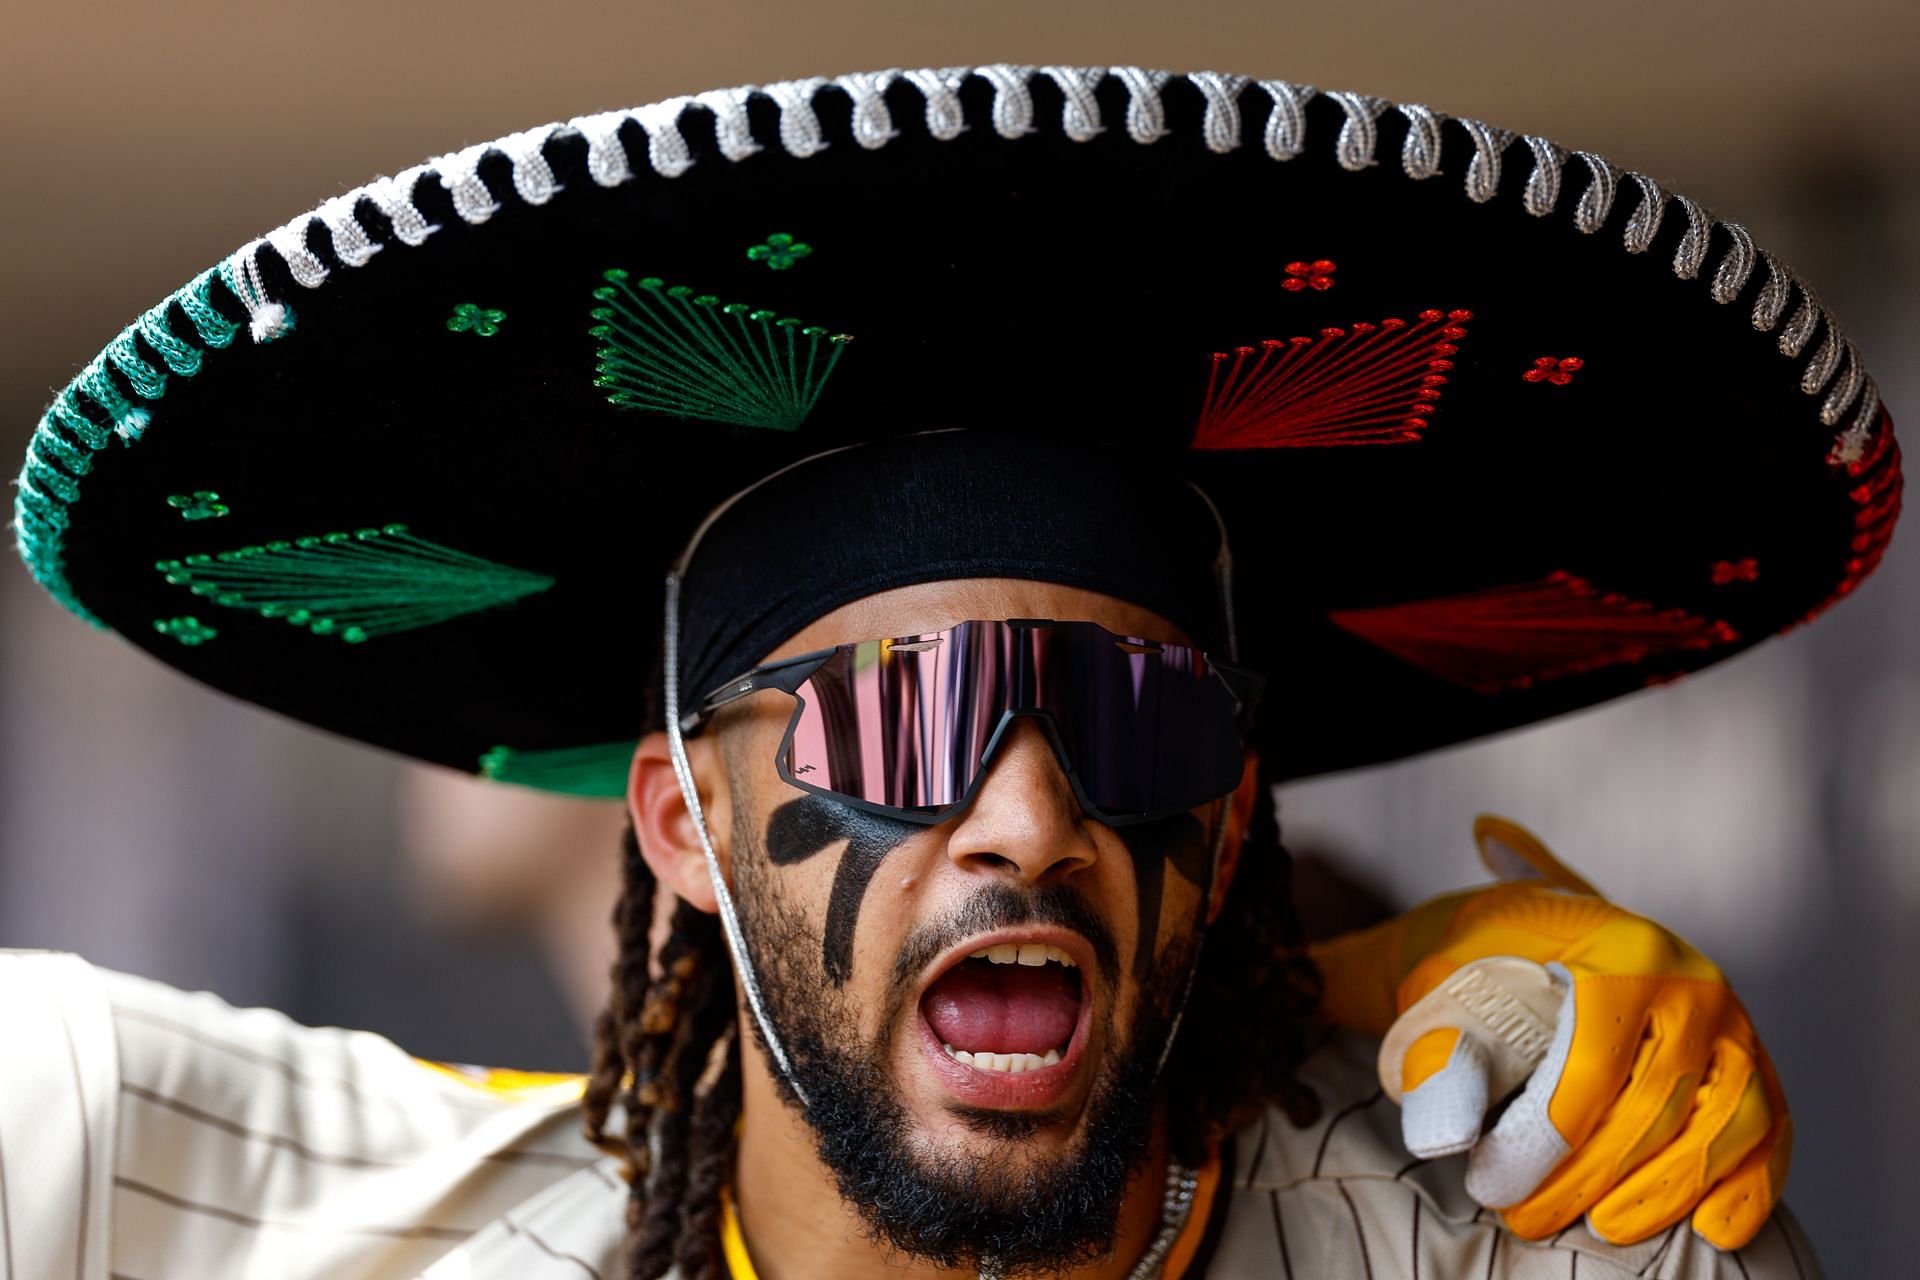 Fernando Tatis Jr. celebrates his home run while wearing a celebratory sombrero in the dugout against the Minnesota Twins at Target Field